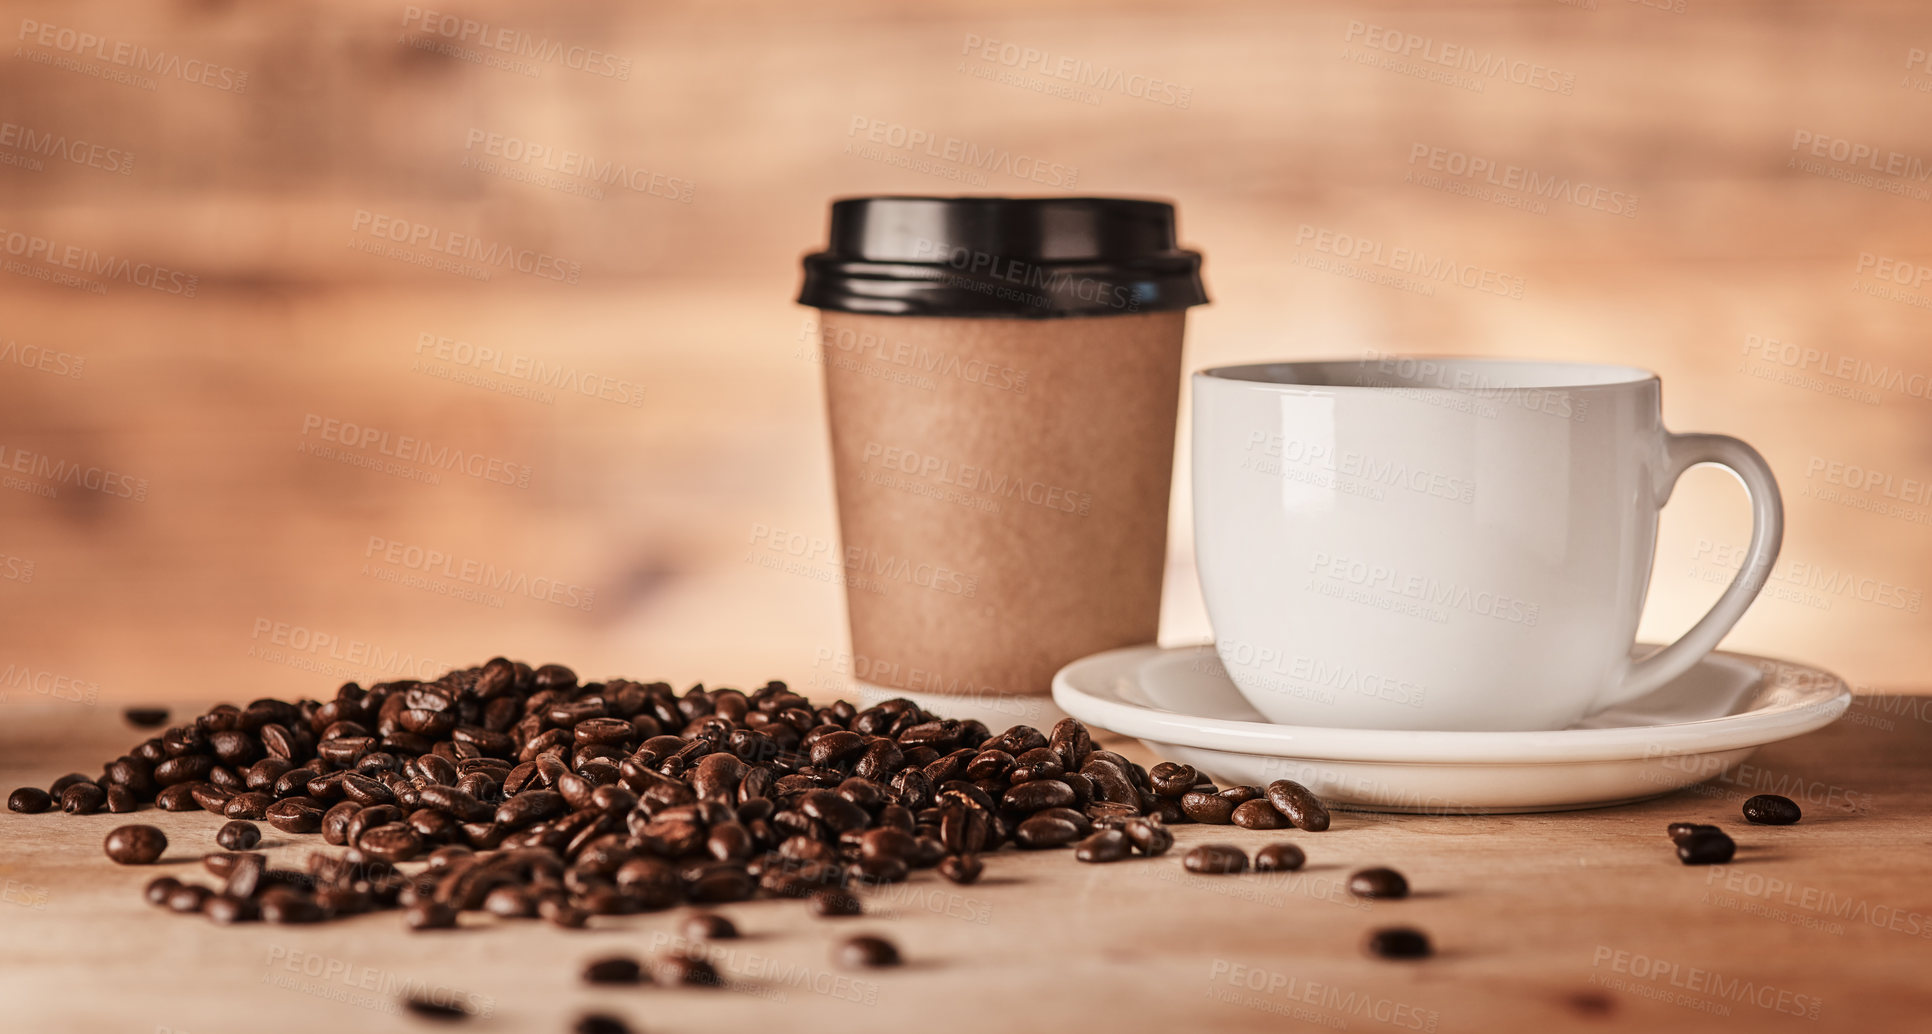 Buy stock photo Closeup shot of a paper cup and teacup surrounded by coffee beans